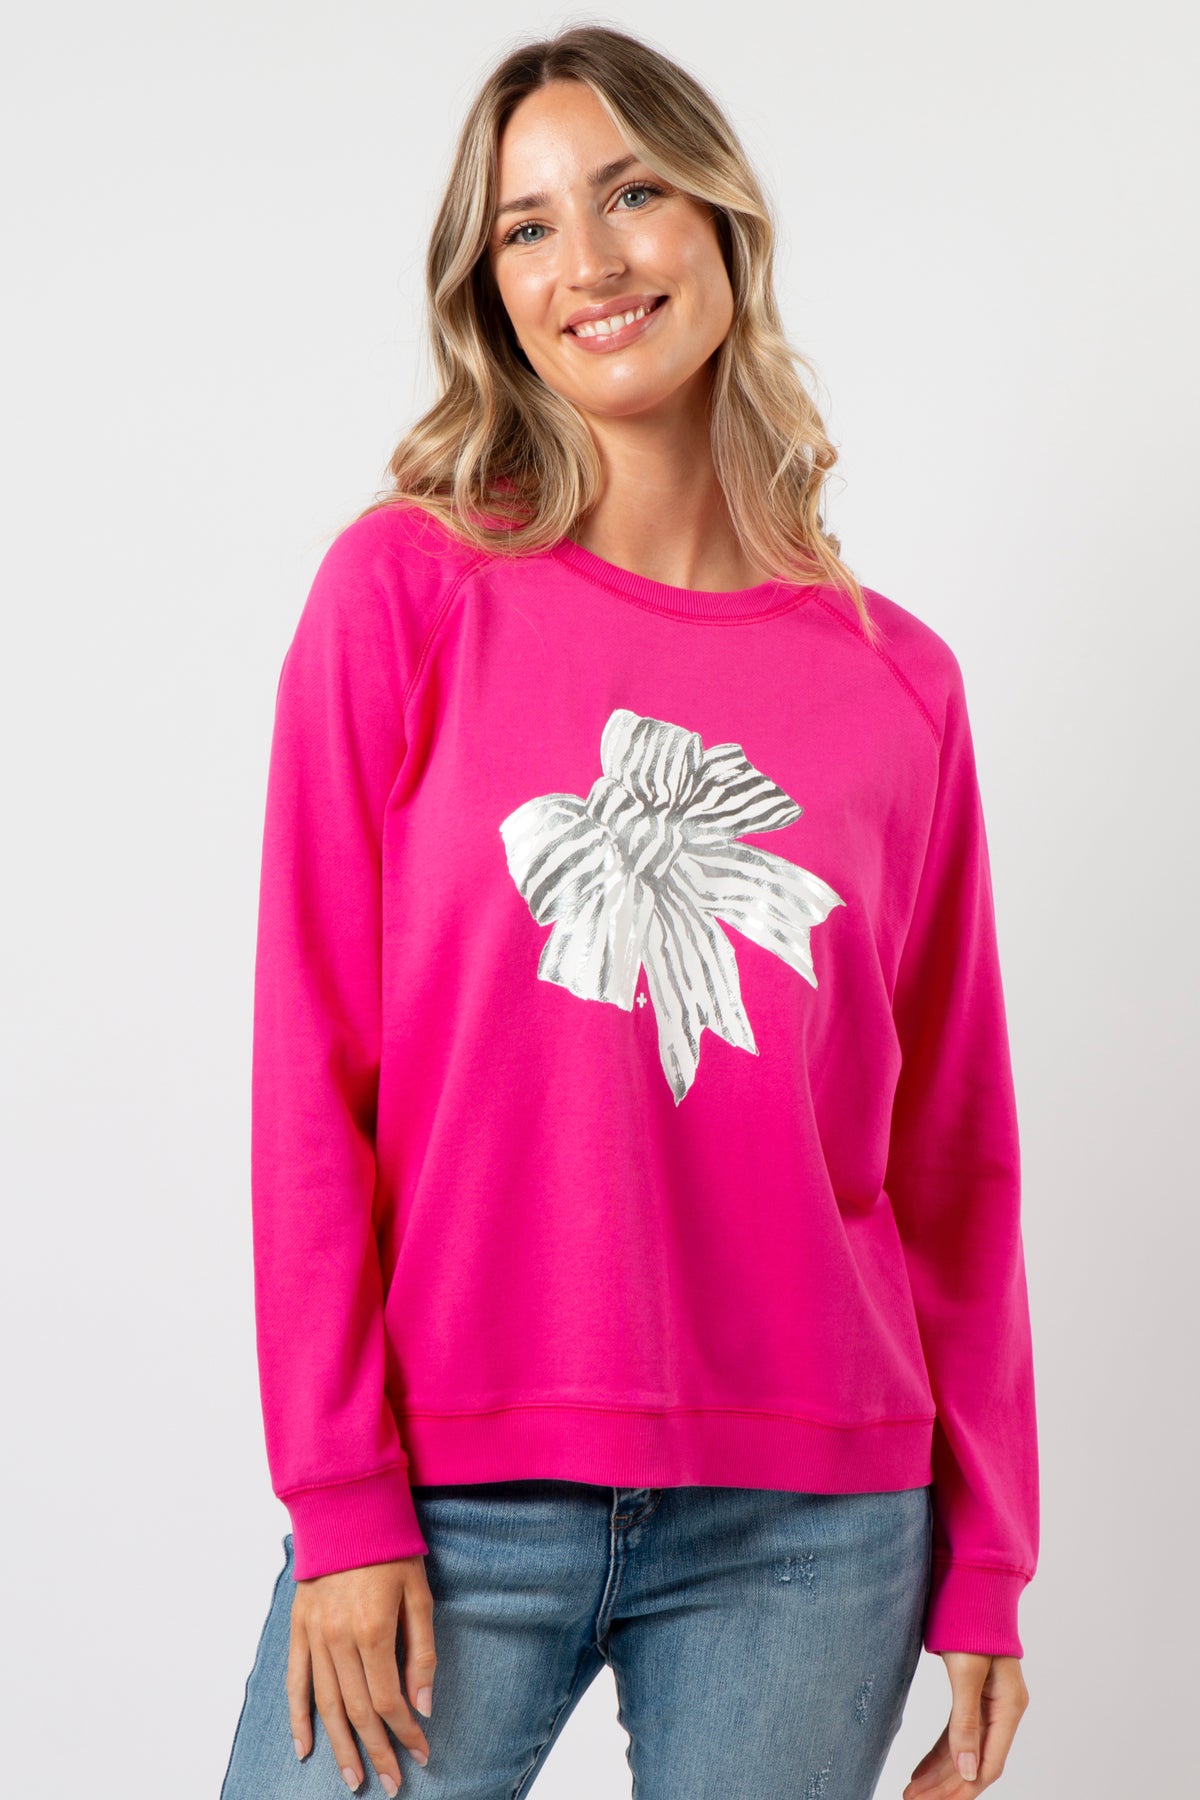 Classic Sweater Neon Pink With Bow - PREORDER DELIVERY END APRIL